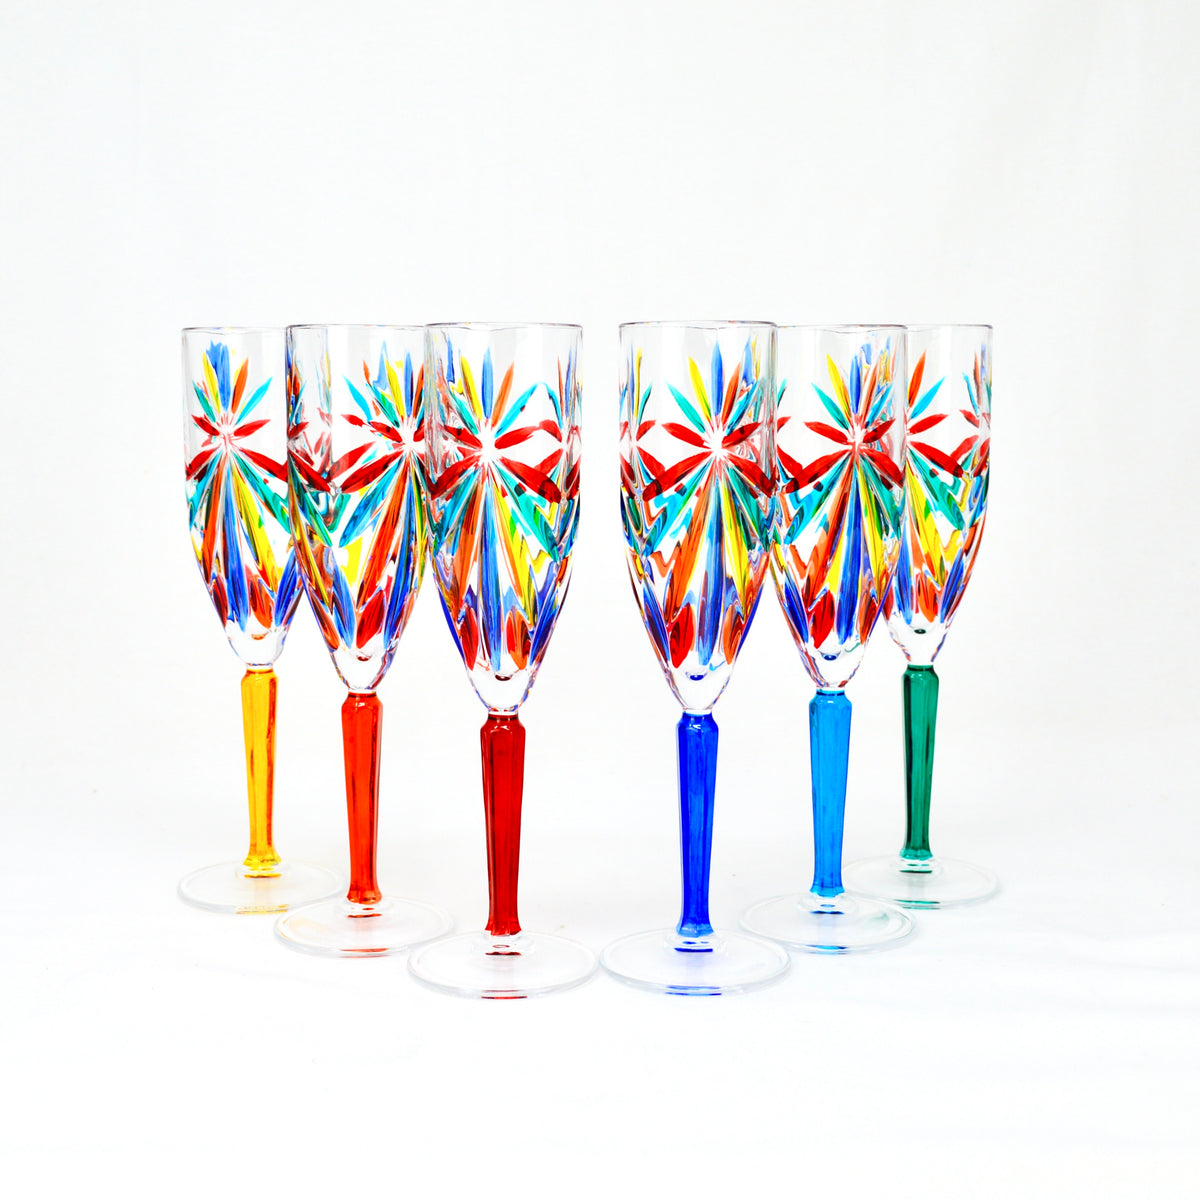 Starburst Champagne Flutes, Hand Painted Italian Crystal, Made in Italy - My Italian Decor